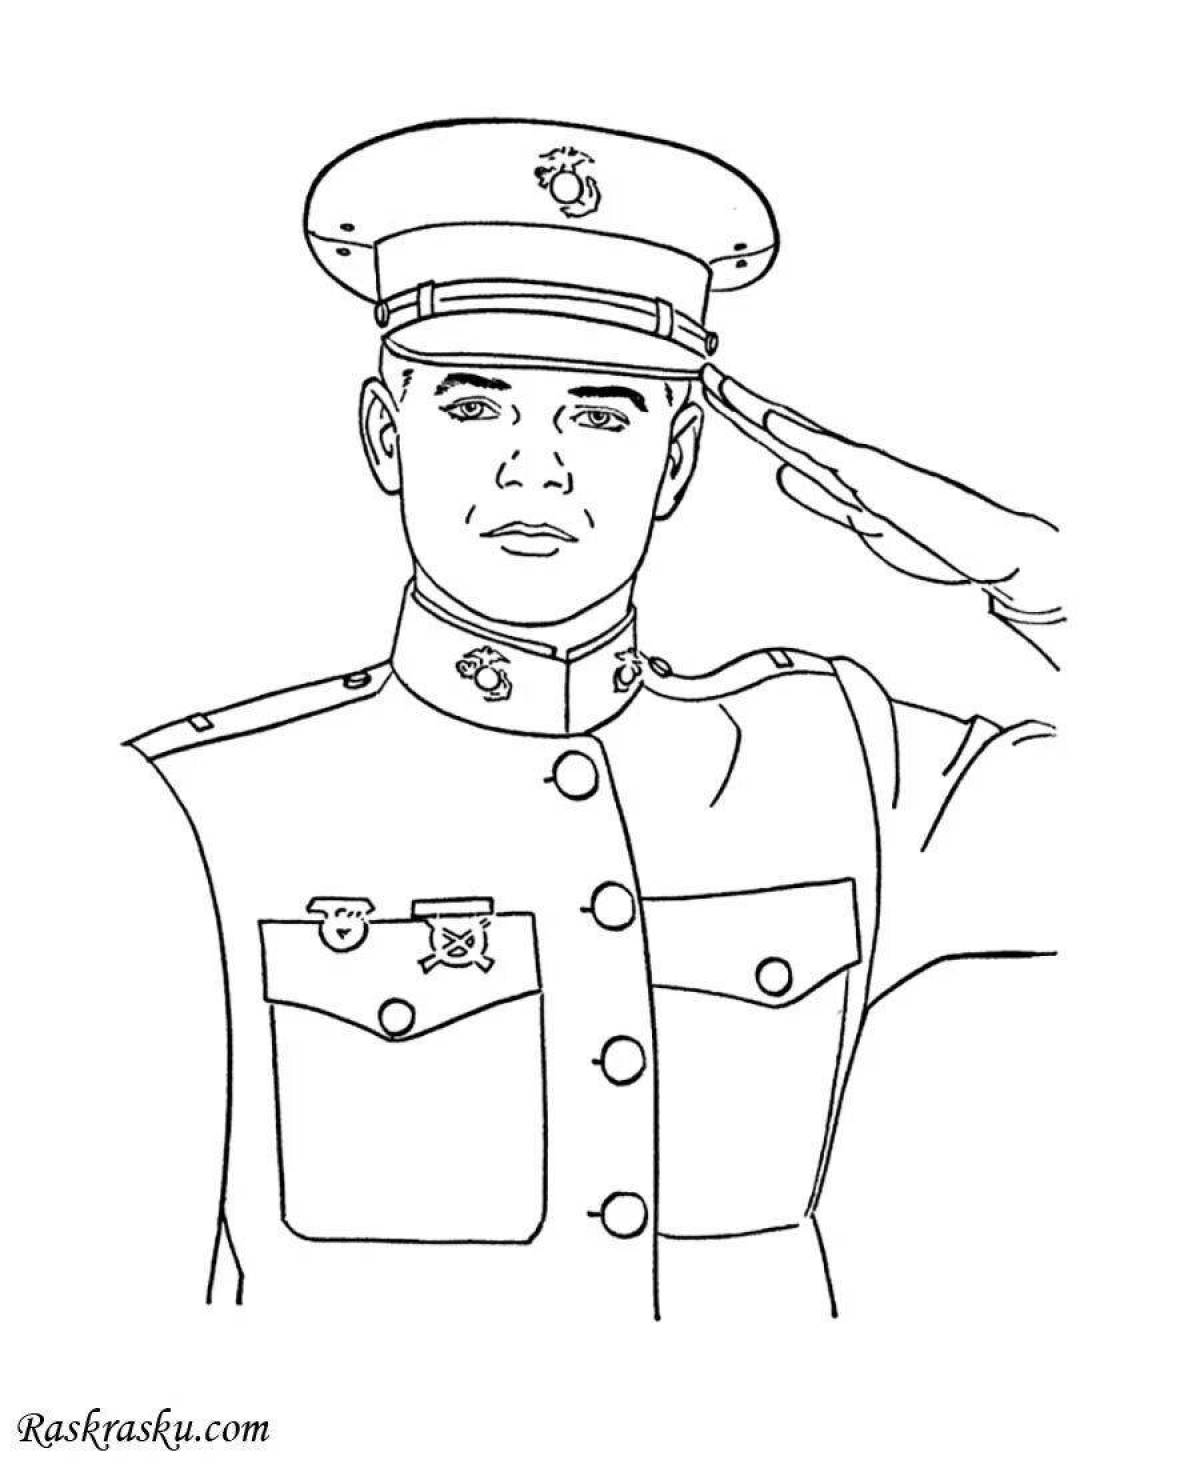 Coloring page of a bright fighting face